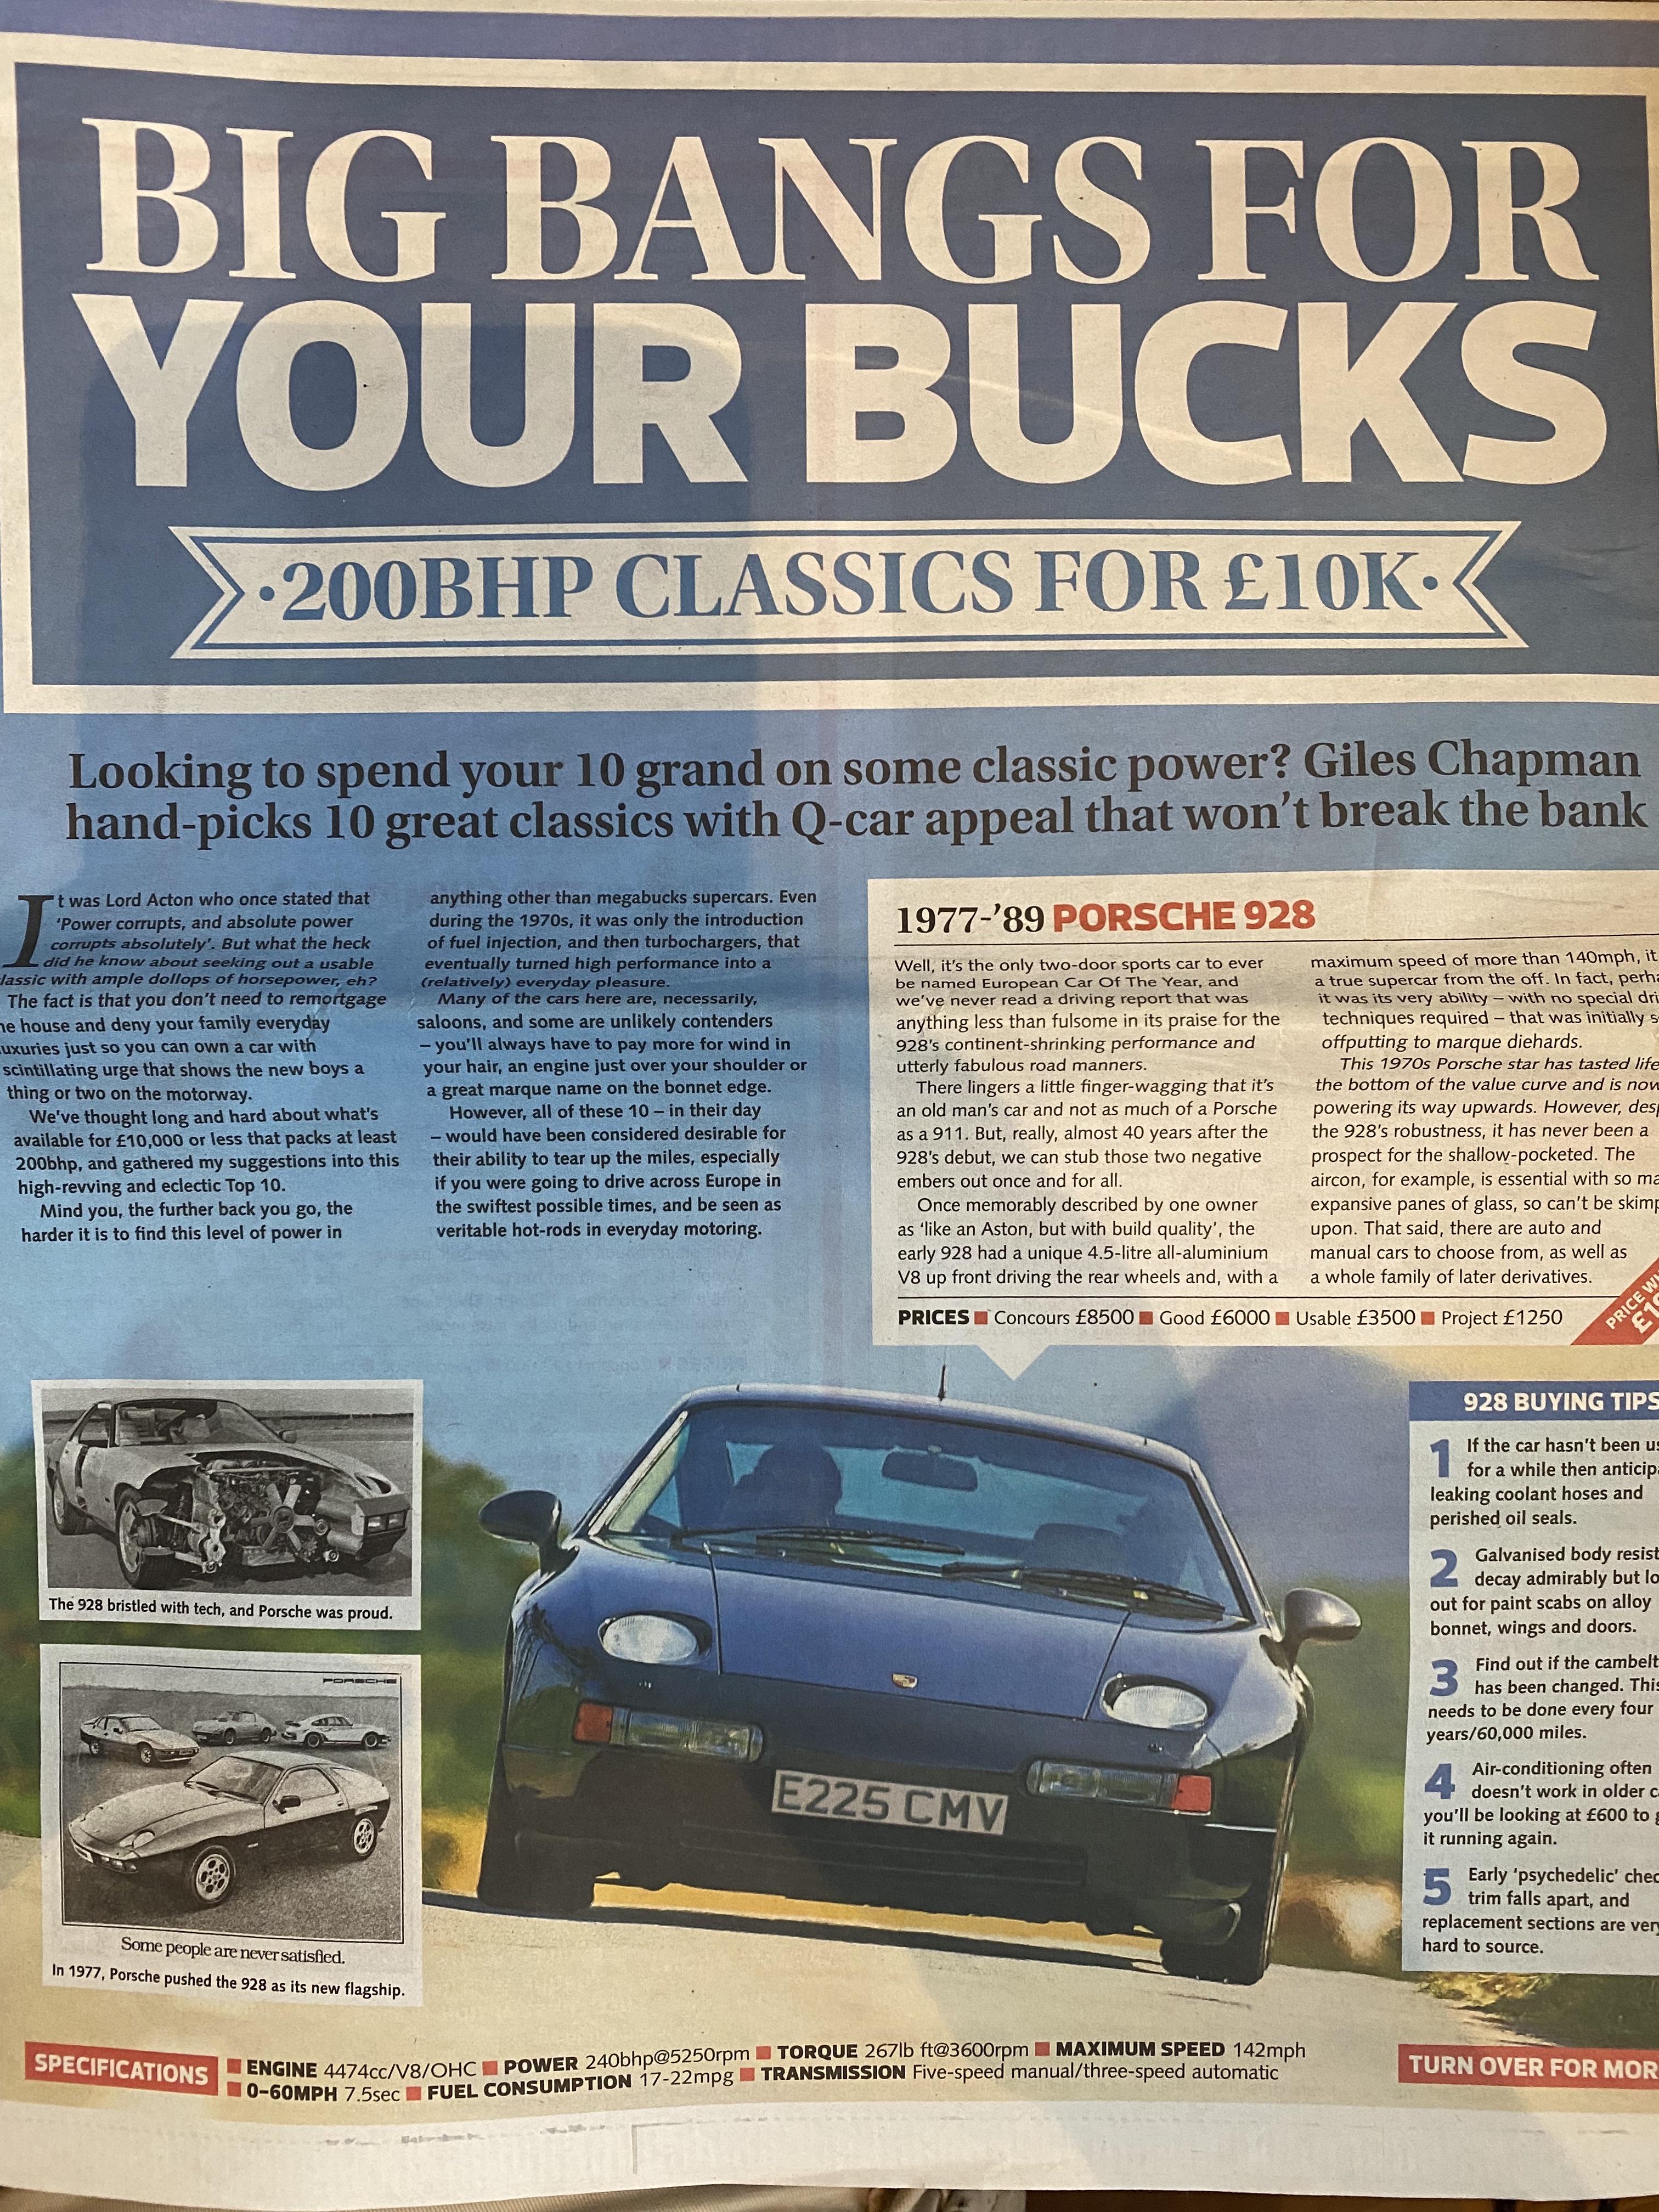 Birg Bangs for your buck - Classic Car Weekly, April 2015